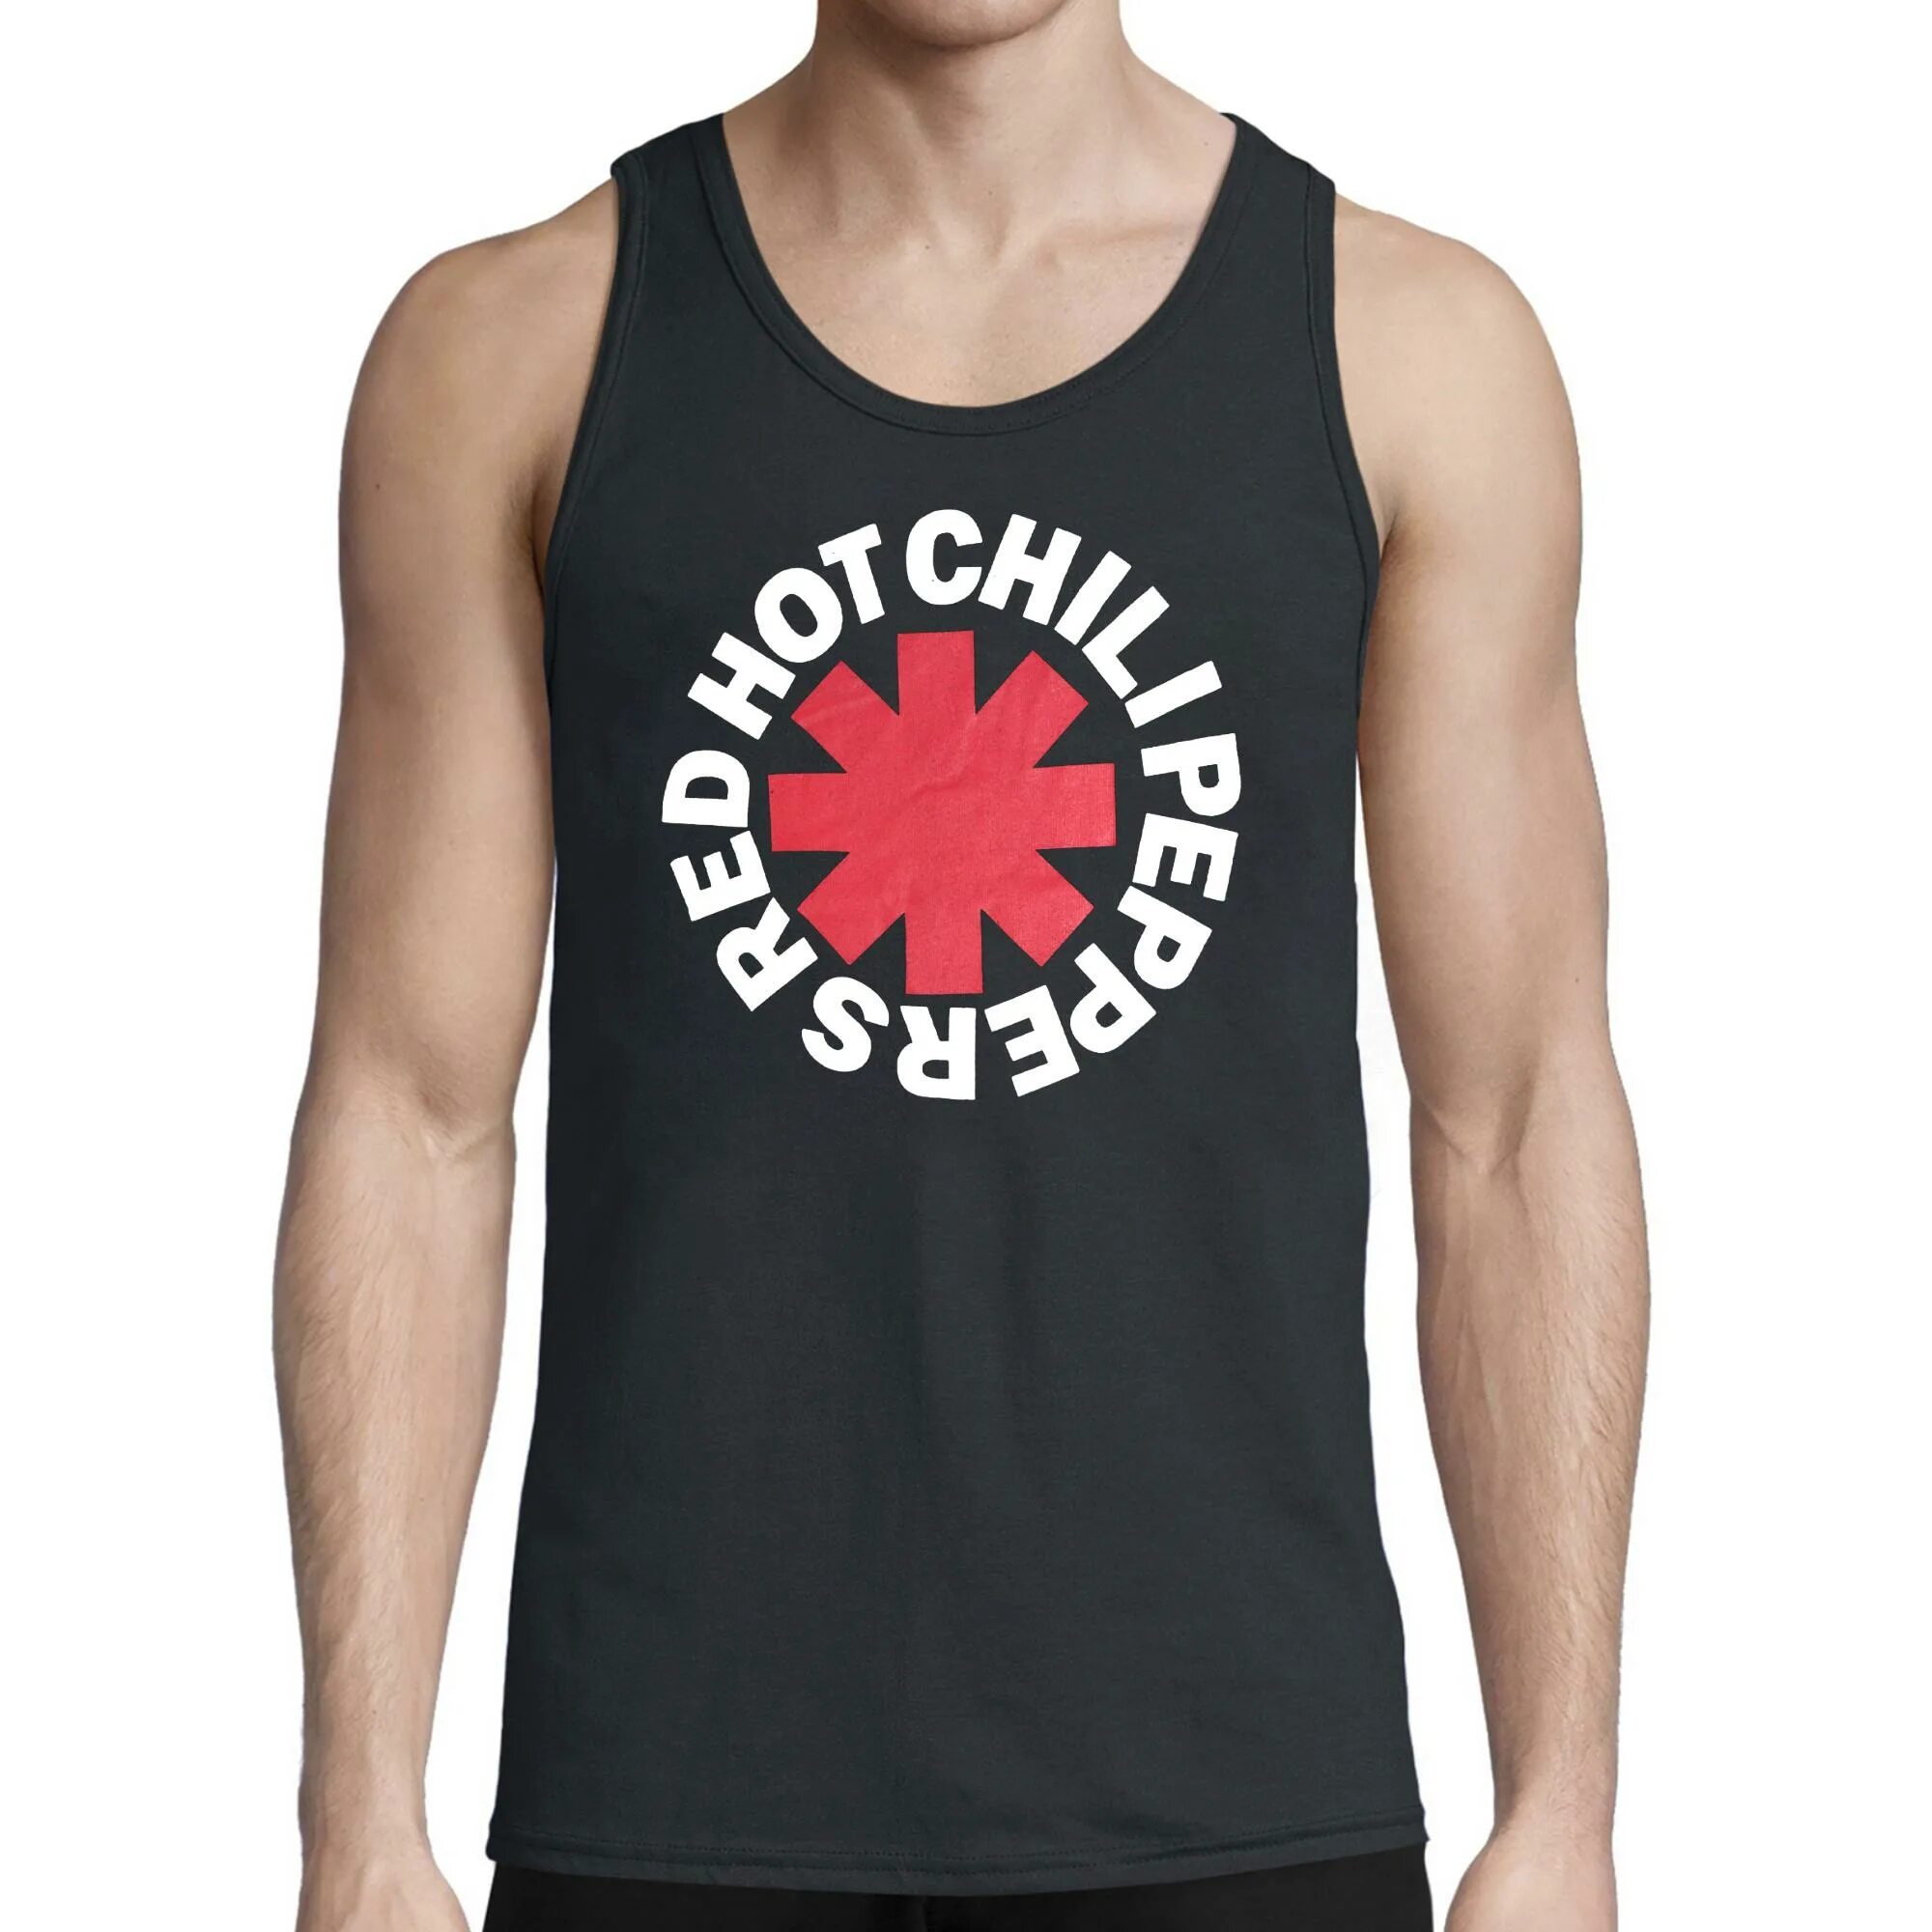 Red hot chili peppers love. Red hot Chili Peppers. Red hot Chili Peppers 2022. Ред хот Чили пеперс. Red hot Chili Peppers Merch 2022.